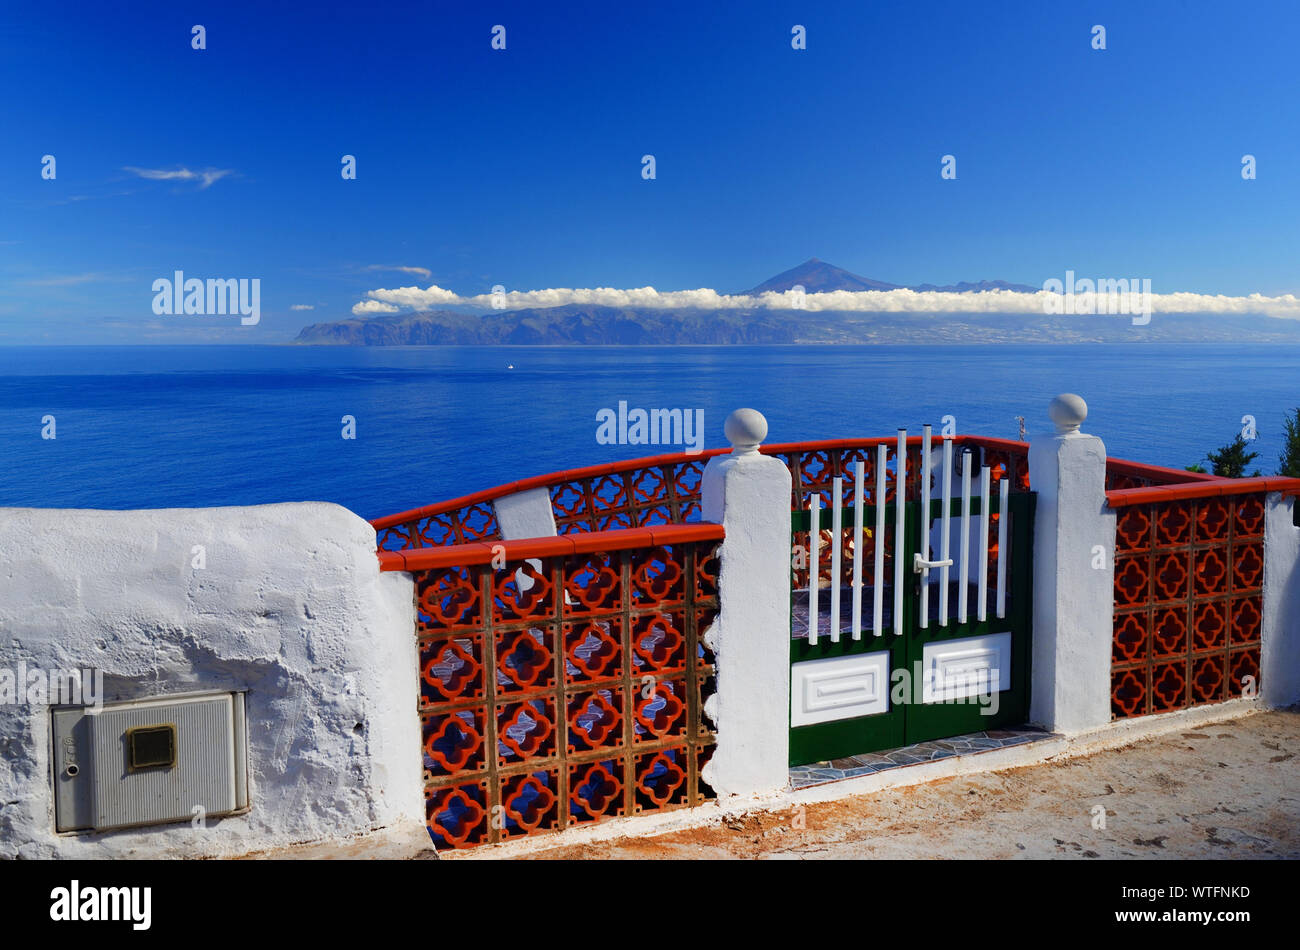 Observation Point By Sea Against Blue Sky Stock Photo